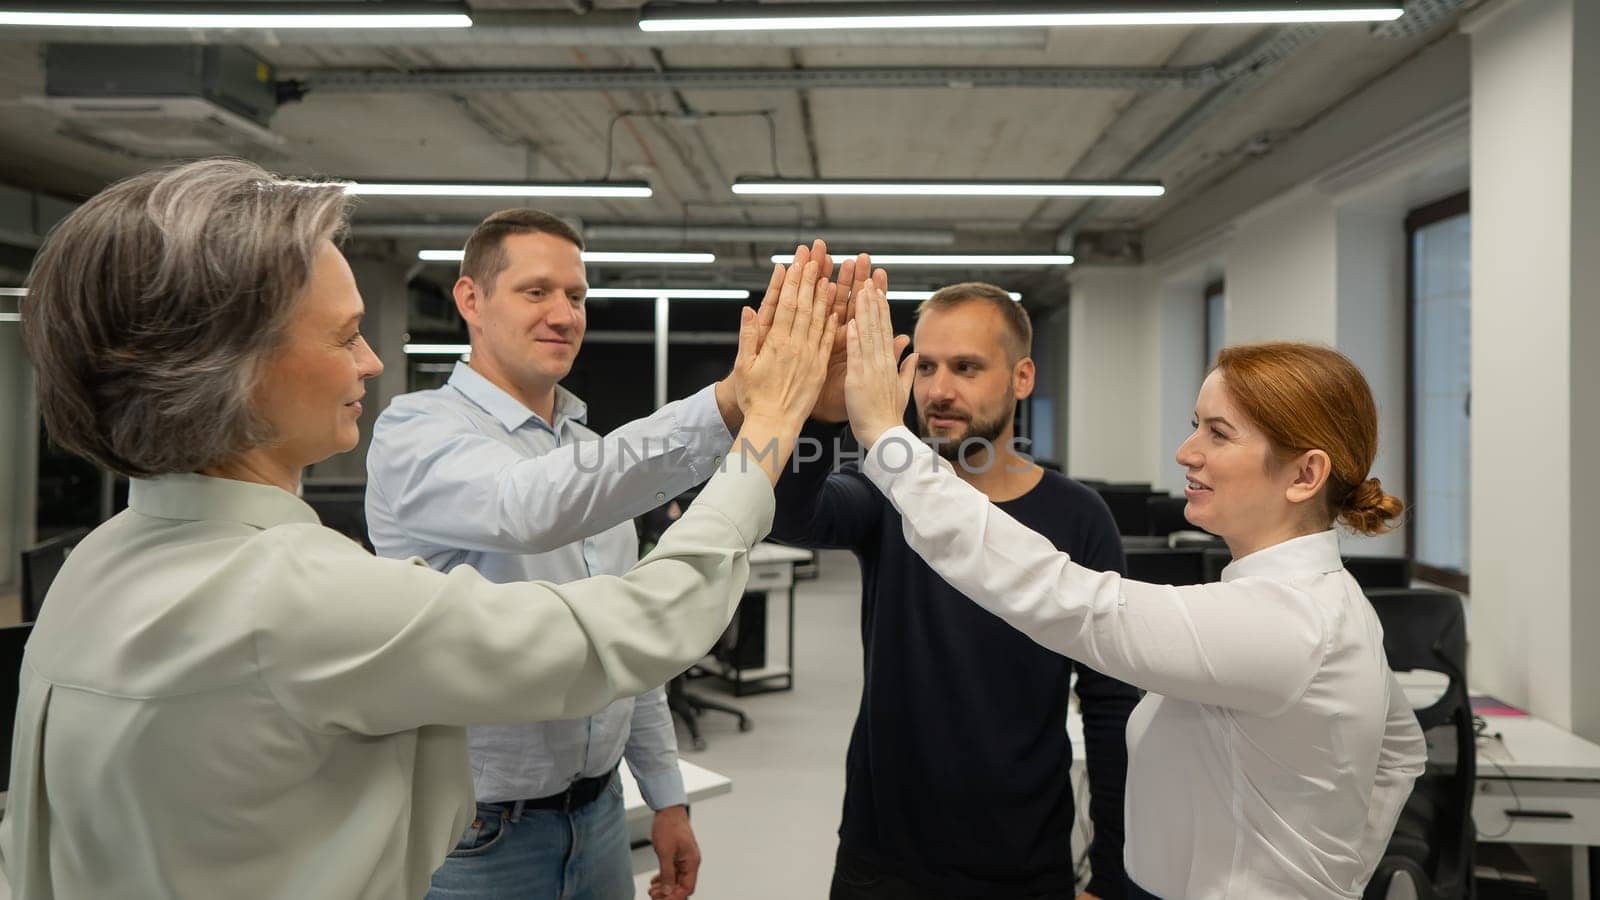 Four co-workers give a high five in the office. by mrwed54